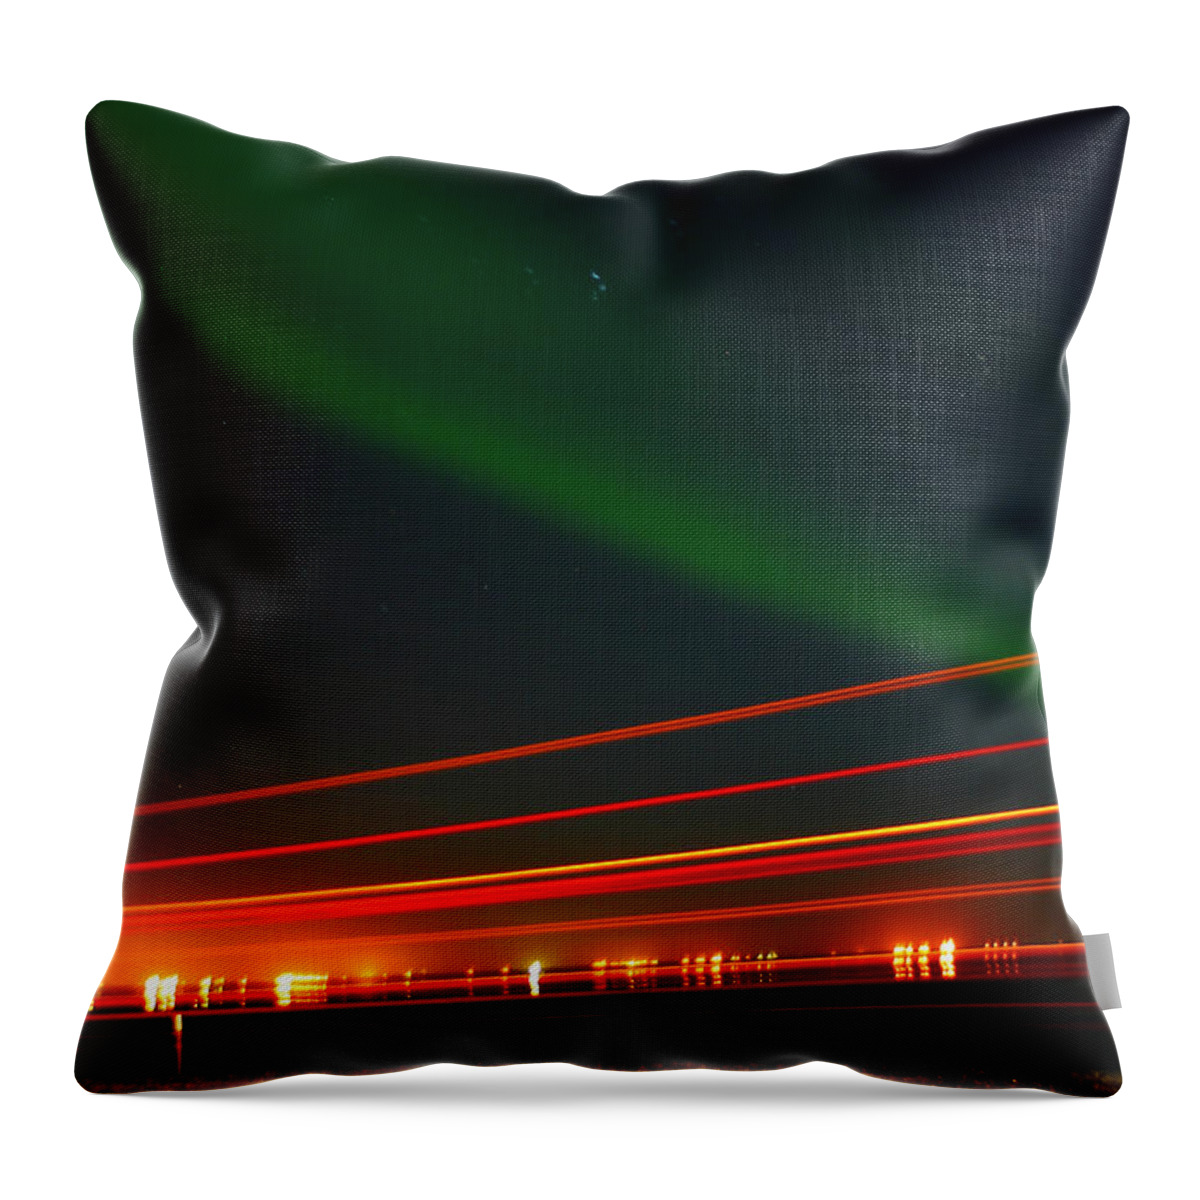 Northern Lights Throw Pillow featuring the photograph Northern Lights by Anthony Jones